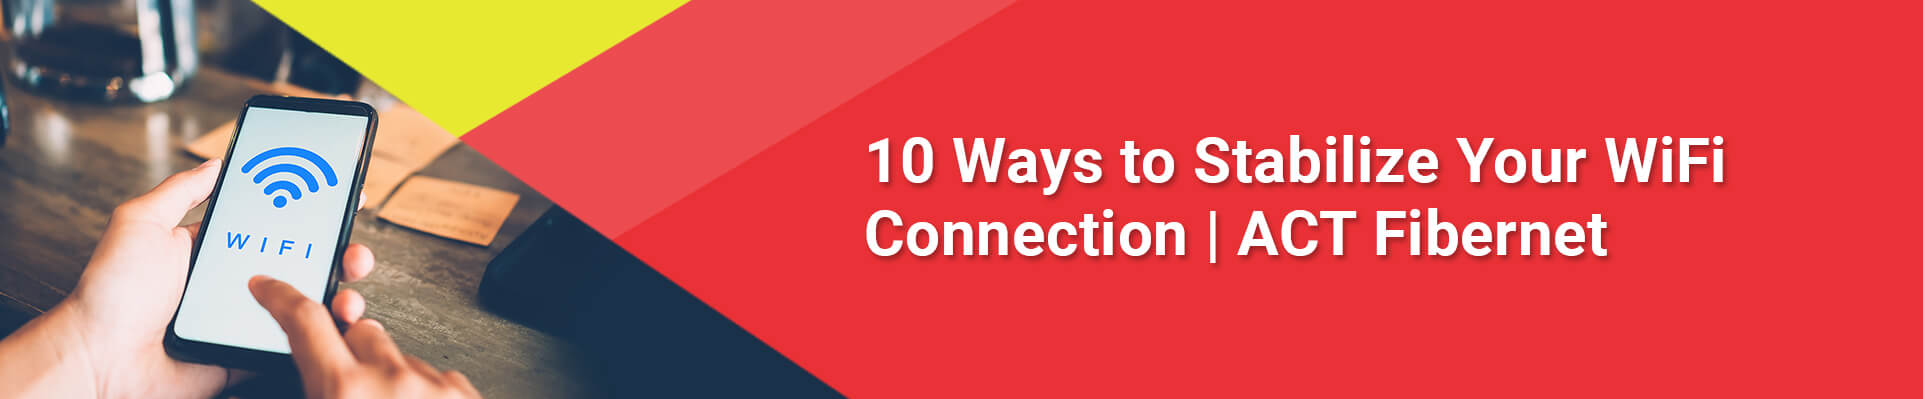 10 Ways to Stabilize Your Wi-Fi Connection